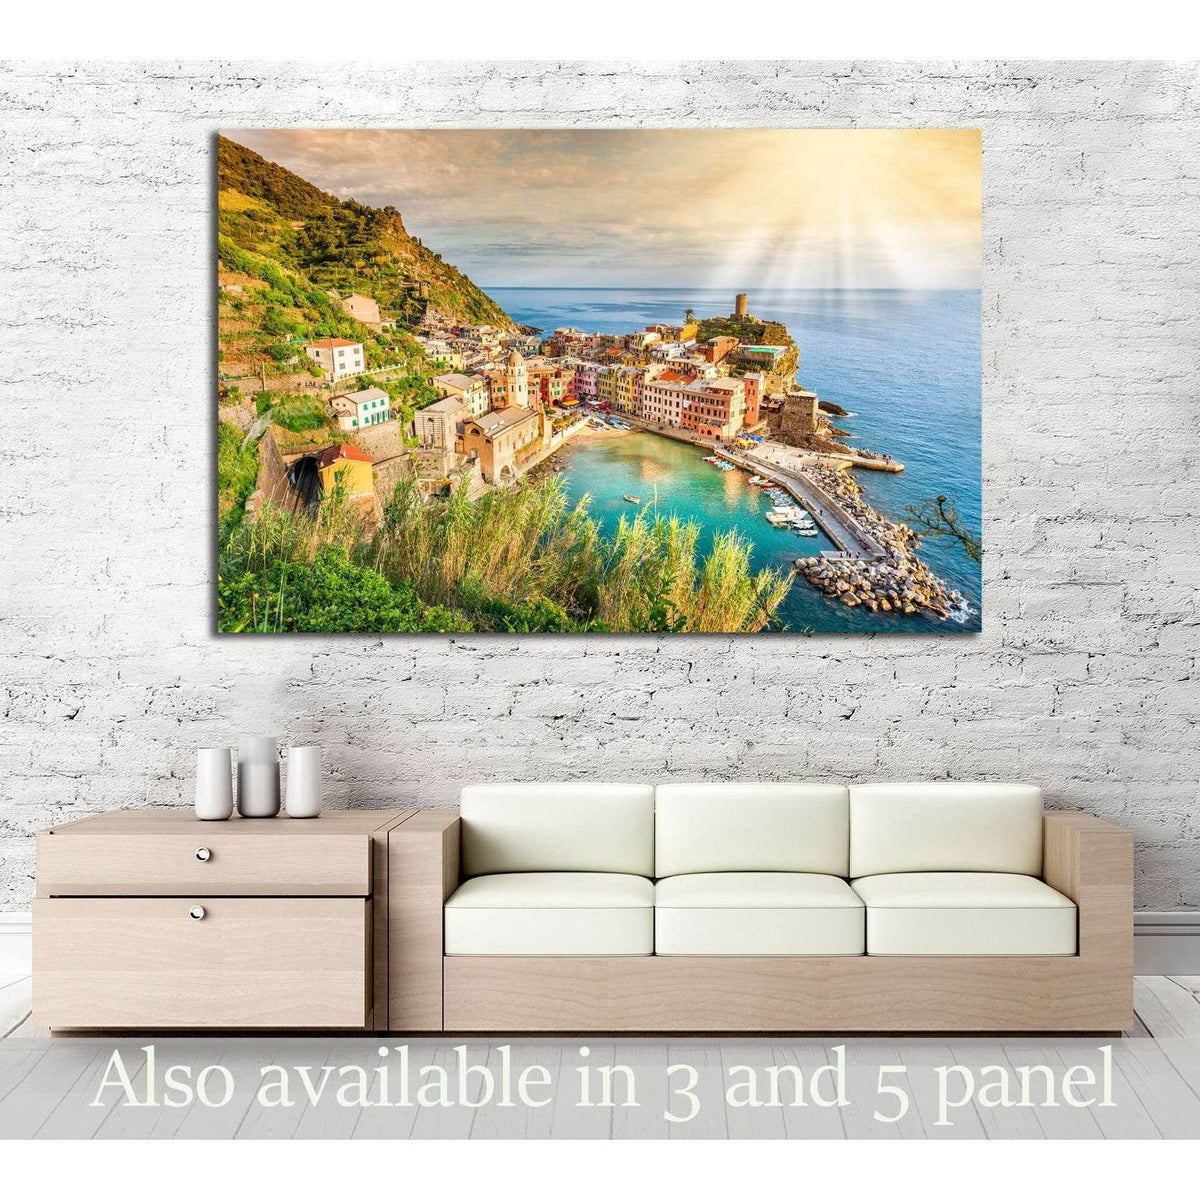 Vernazza Cinque Terre Canvas Print - Italian Seaside Village Wall ArtThis canvas print beautifully captures Vernazza, one of the five centuries-old villages of Cinque Terre, Italy, characterized by its colorful houses and the quaint harbor set against the